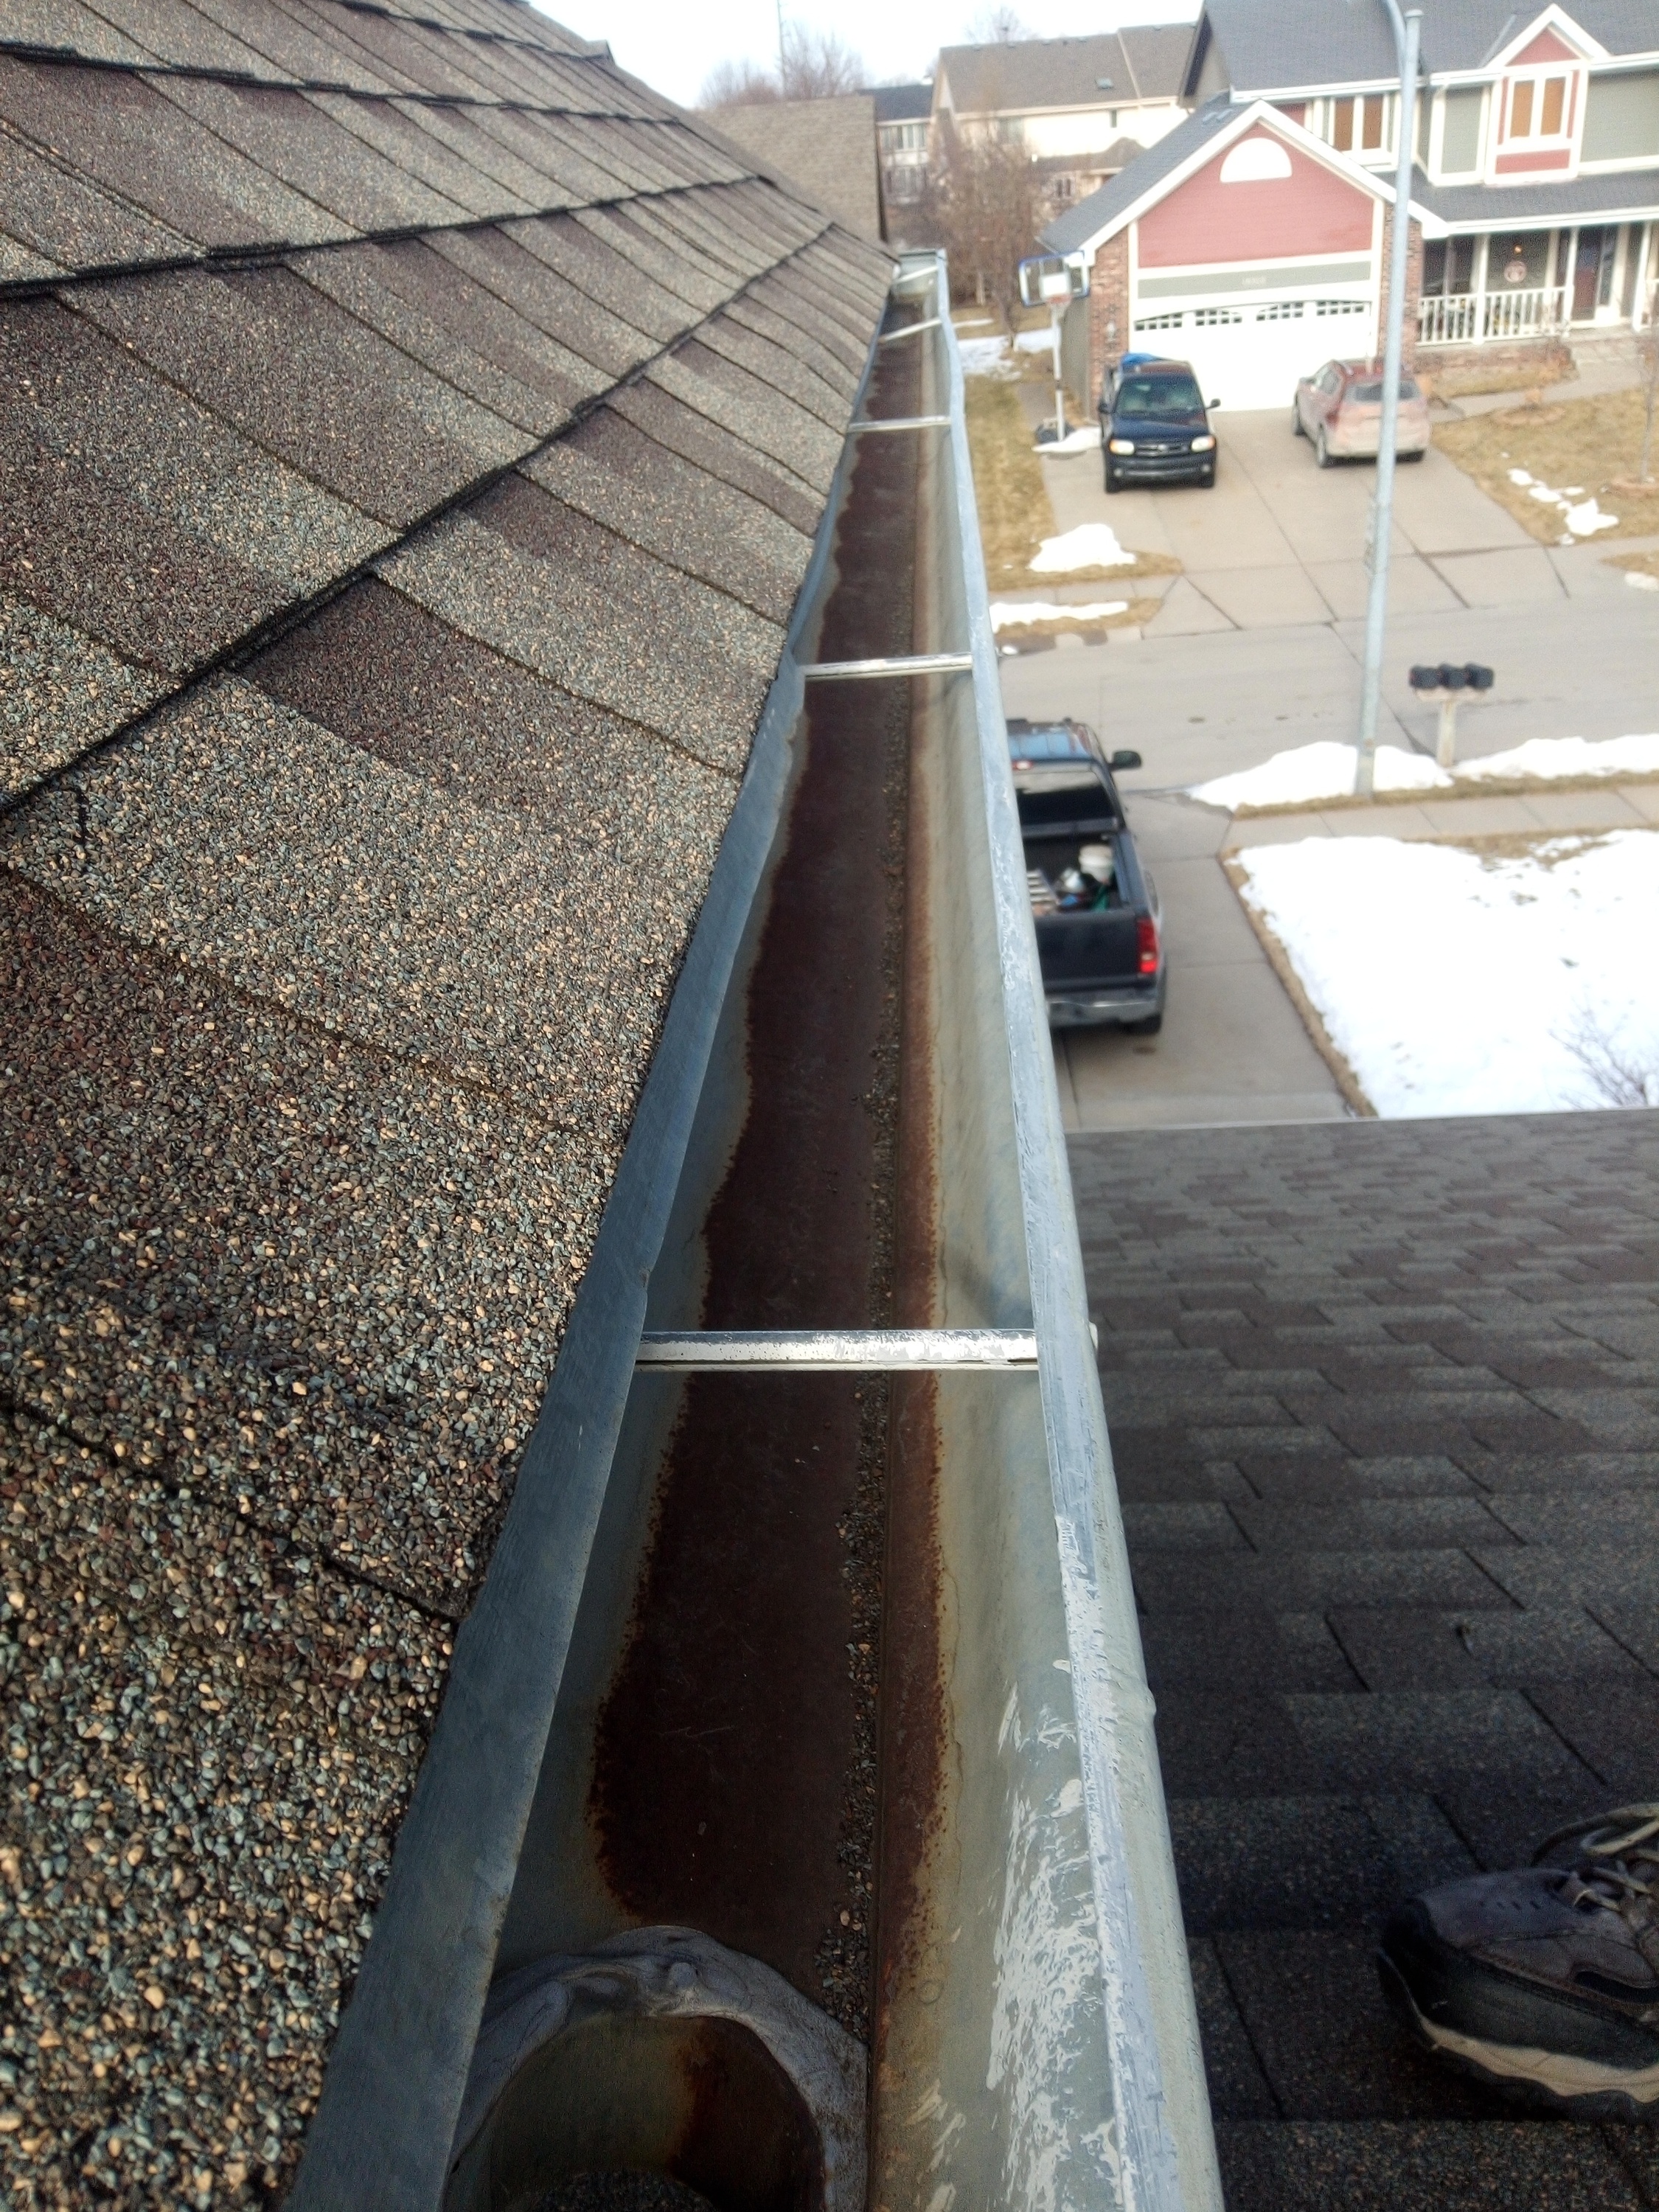 Clean Pro Gutter Cleaning Raleigh